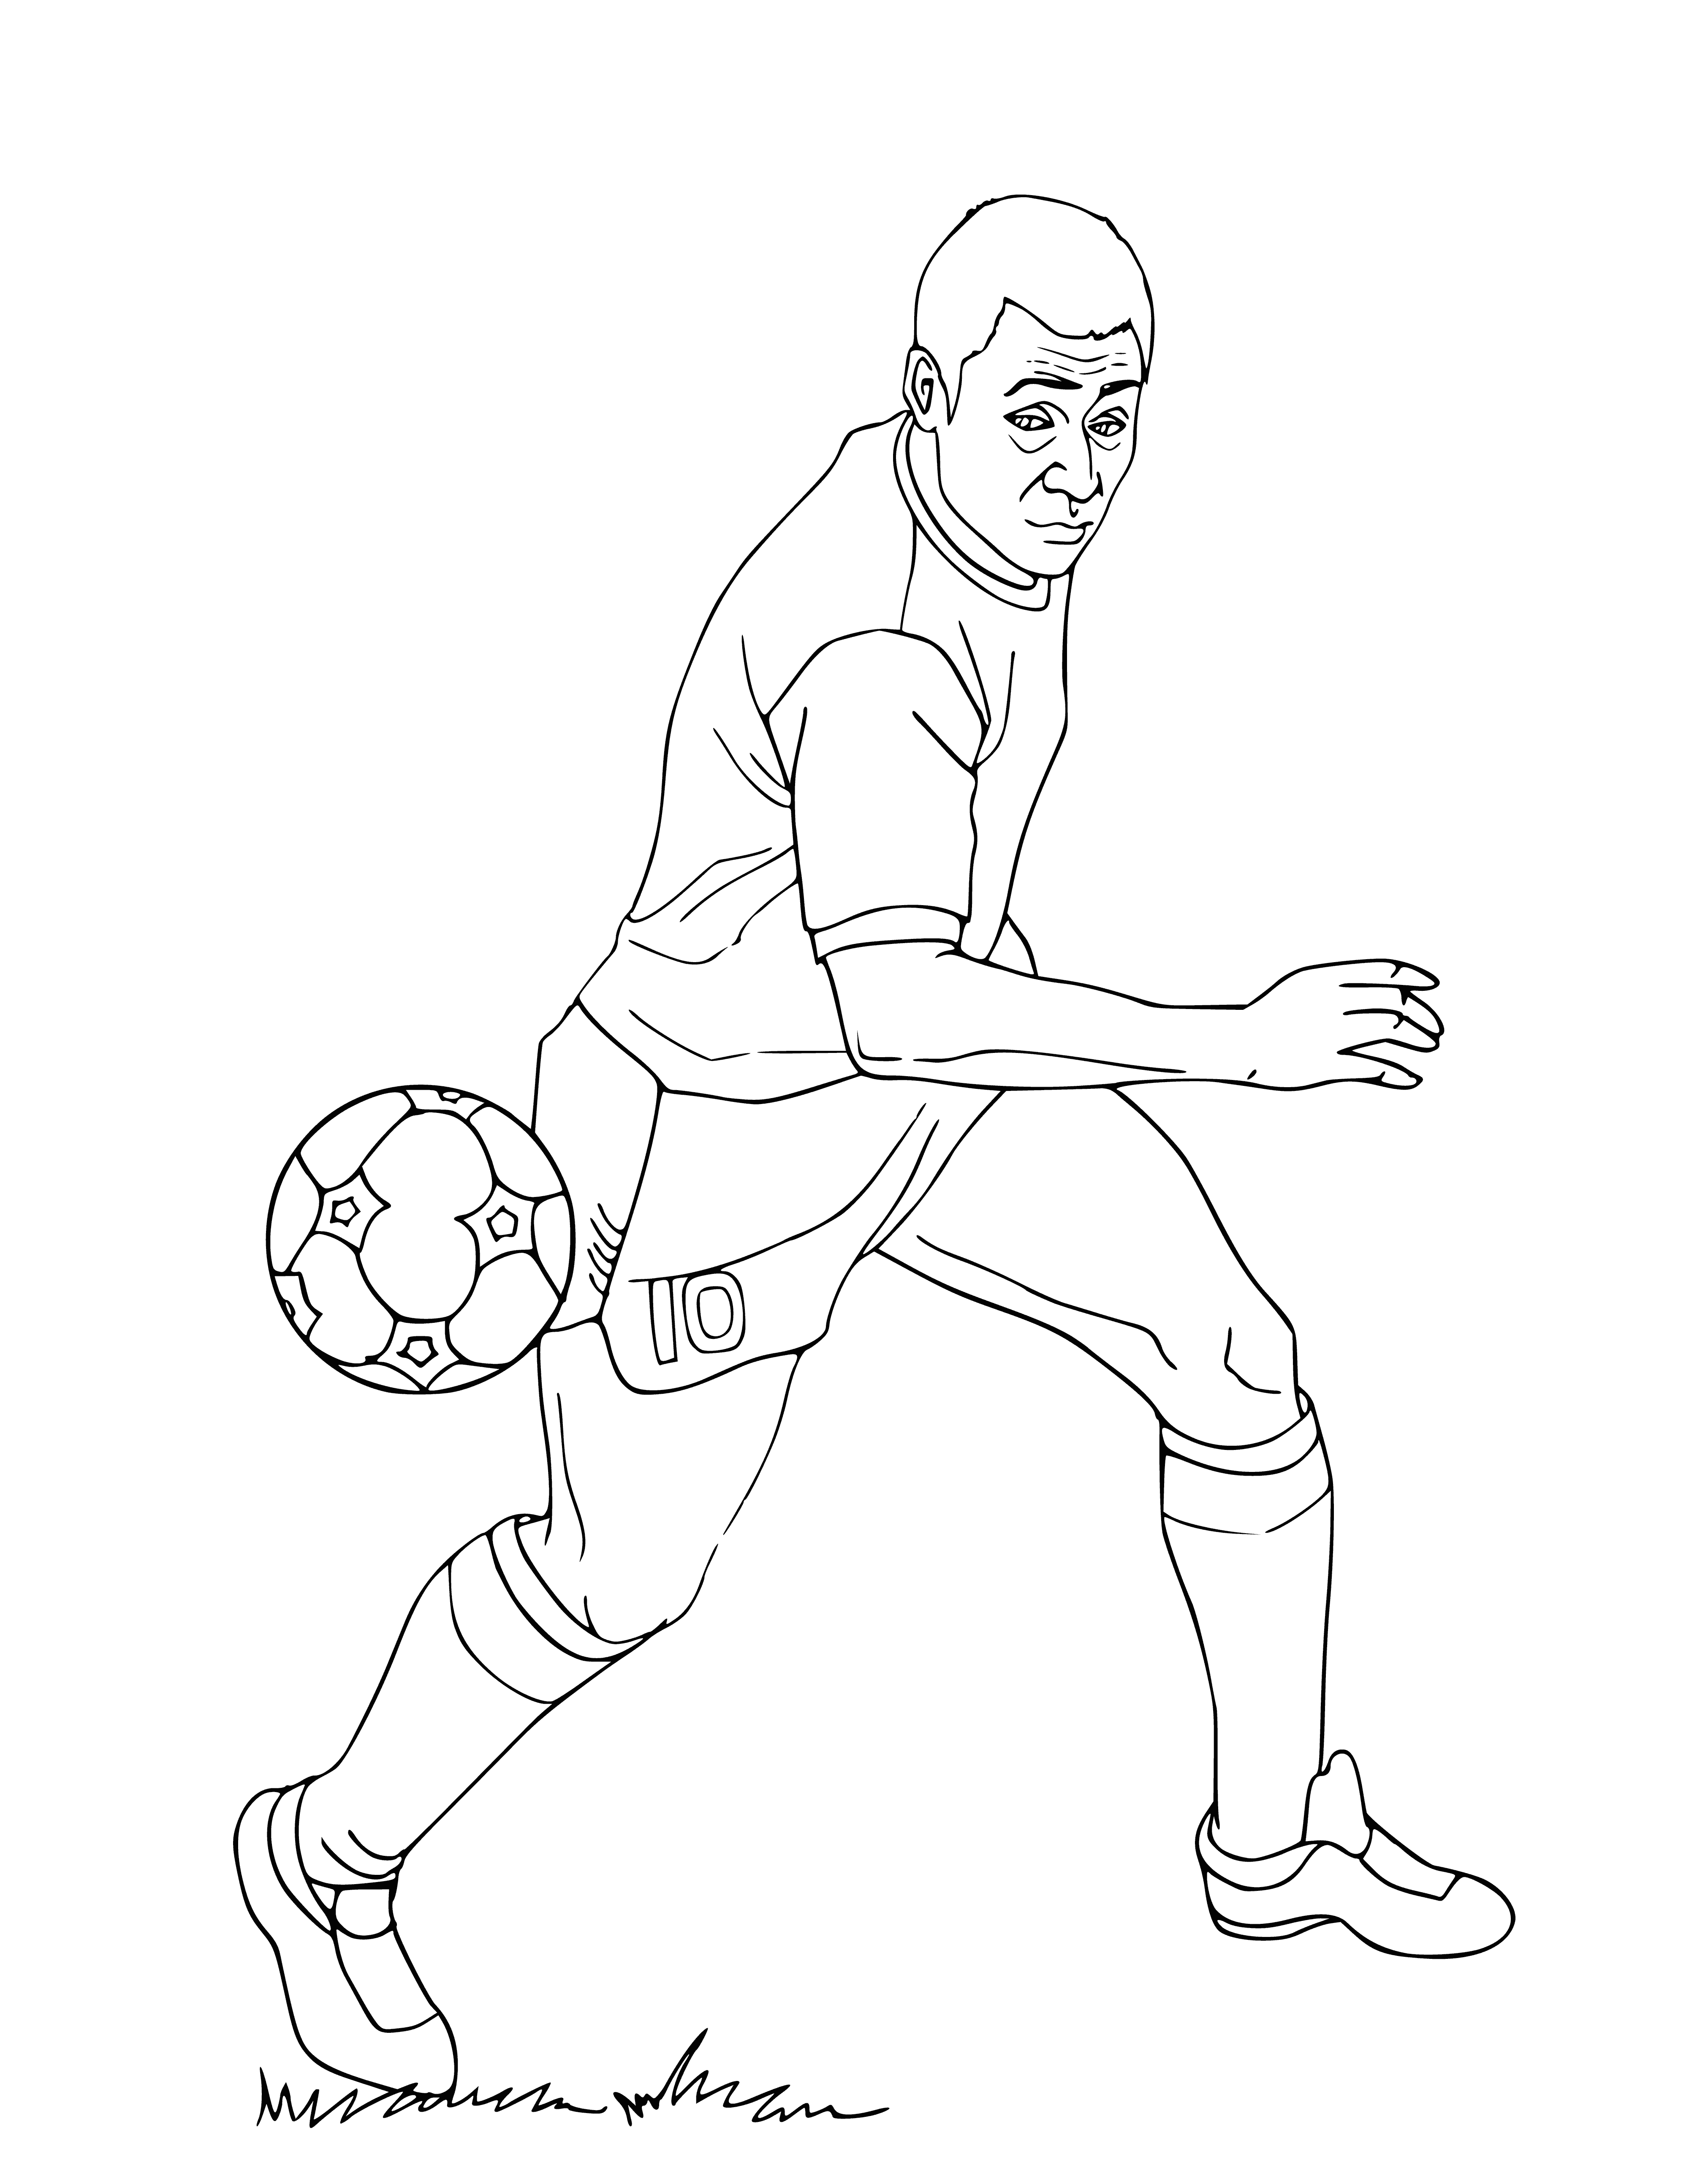 coloring page: Man kicking soccer ball in red shirt, blue shorts, red socks; tattoo on right arm.